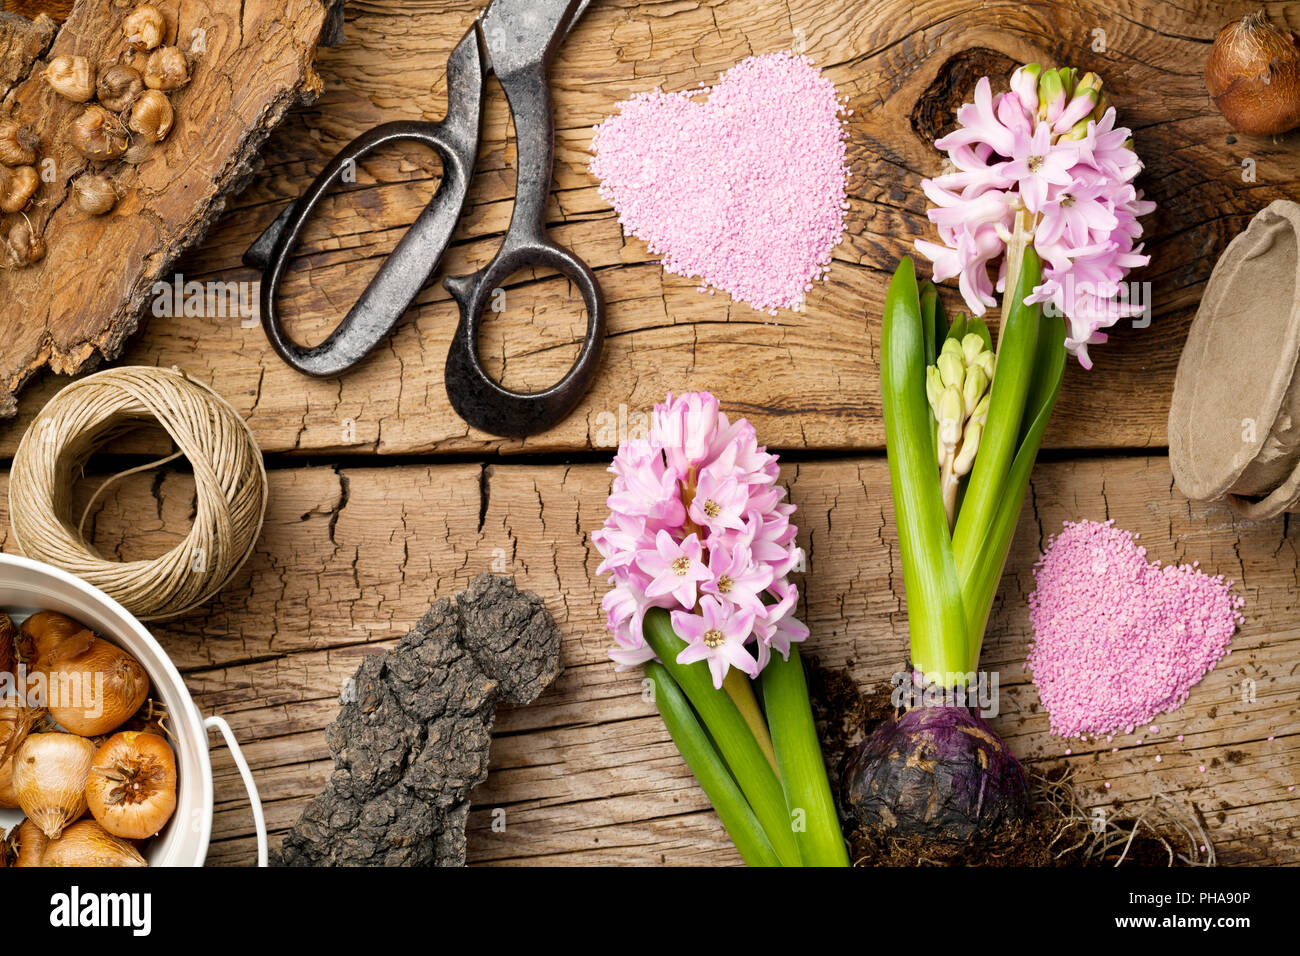 Gardening Background with Flower and Bulbs on Wooden Table Stock Photo